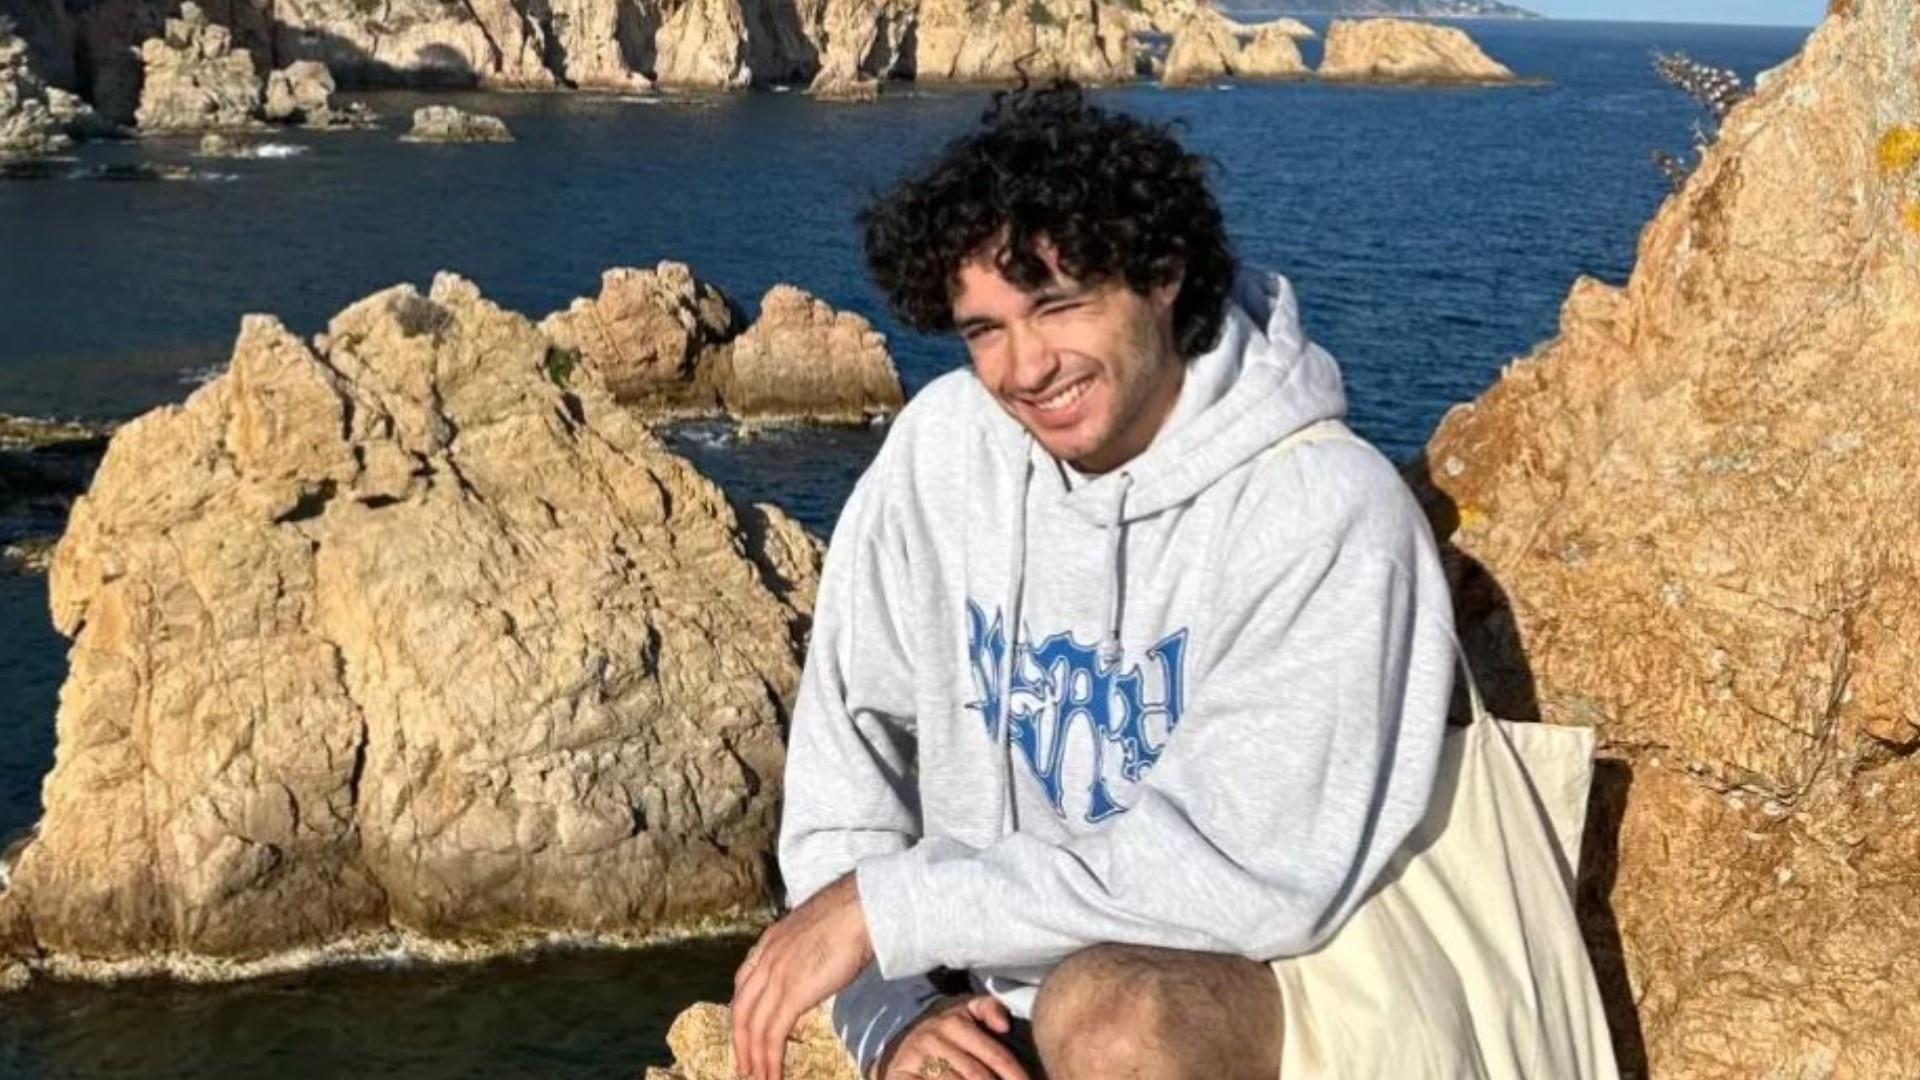 The U.S. Department of State is working with David DuVall's family following his arrest. The 23-year-old skateboarder recently graduated from UNT.